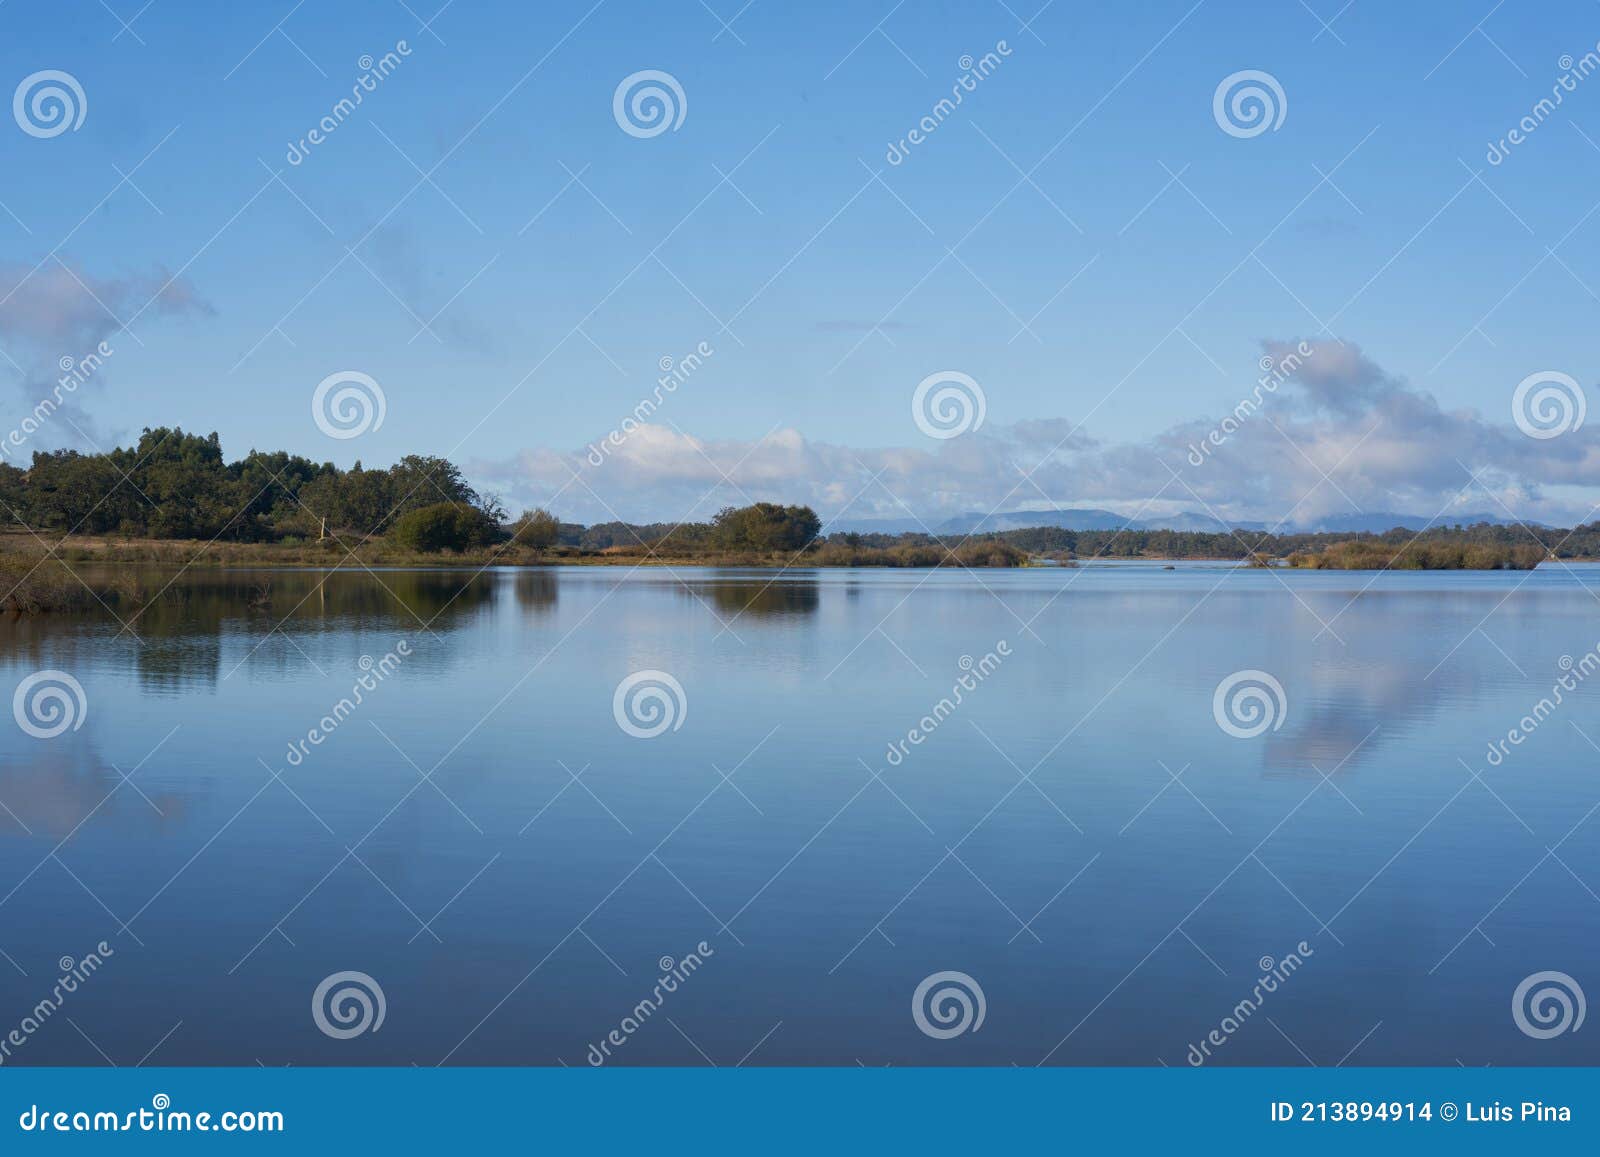 lake dam landscape with reflection of gardunha mountains and trees on a cloudy day in santa agueda marateca dam in portugal